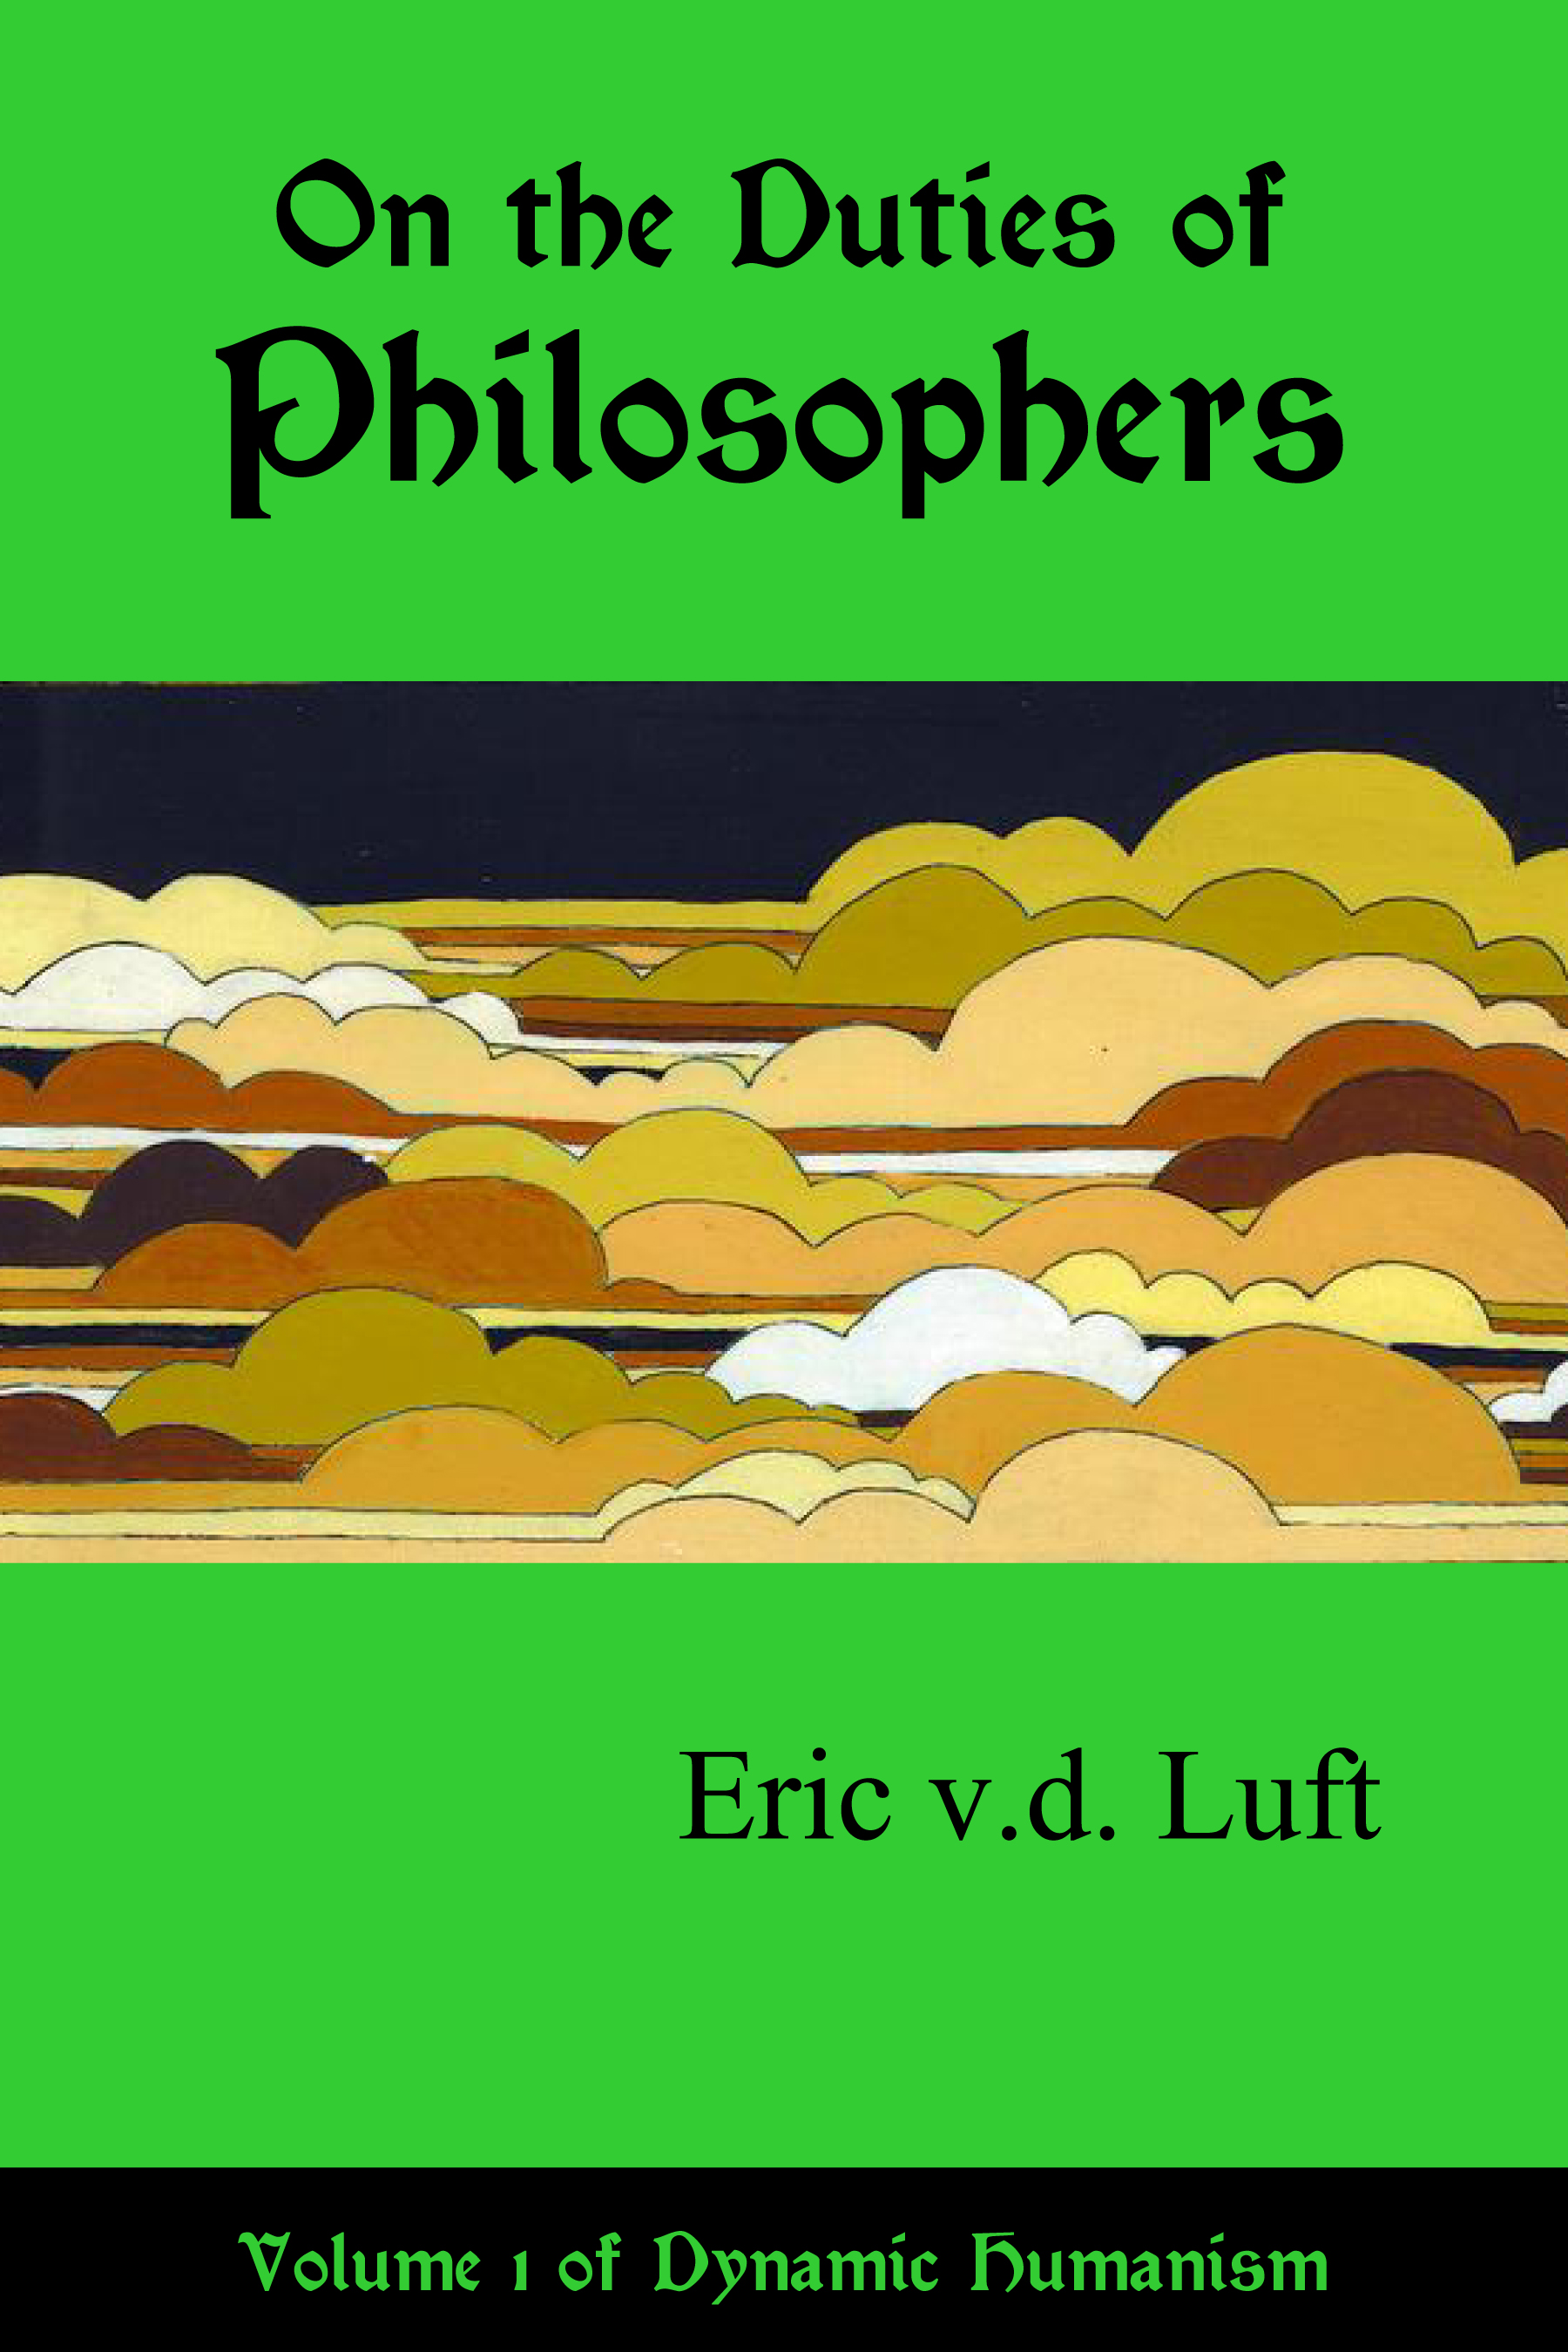 Dynamic Humanism, volume 1: On the Duties of Philosophers